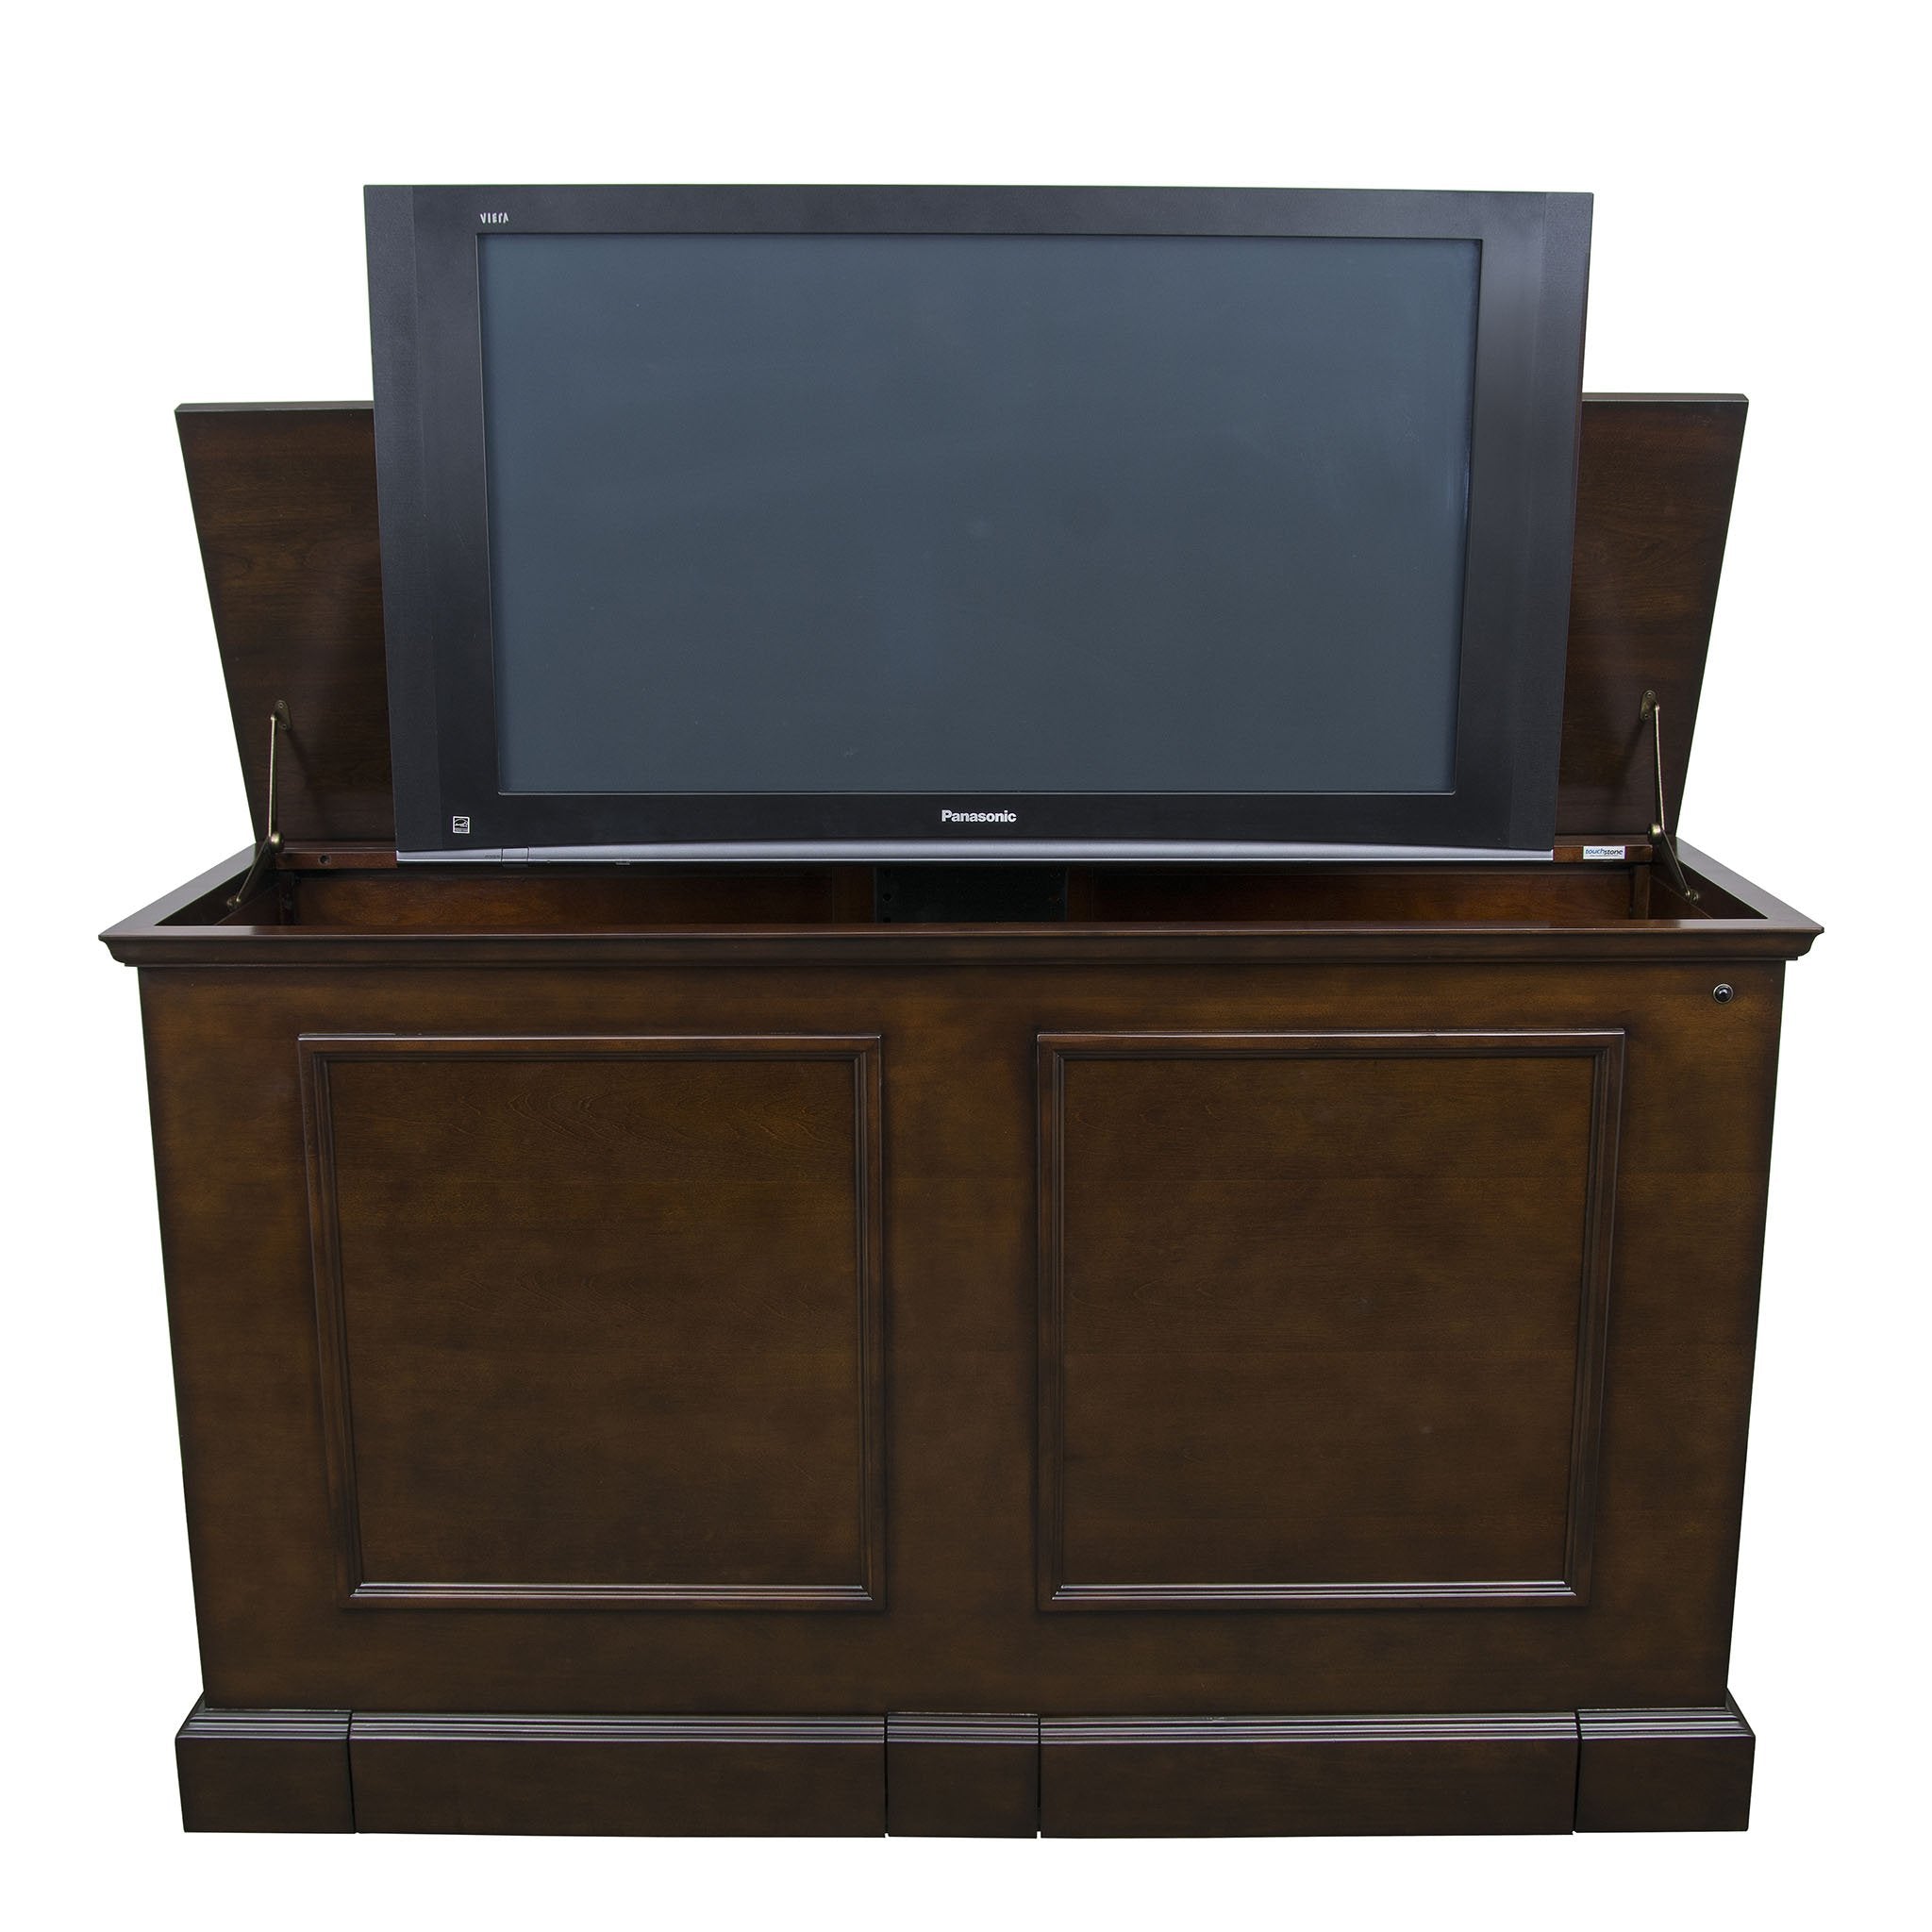 Grand Elevate 74008 Espresso TV Lift Cabinet  - Touchstone Home Products, Inc.